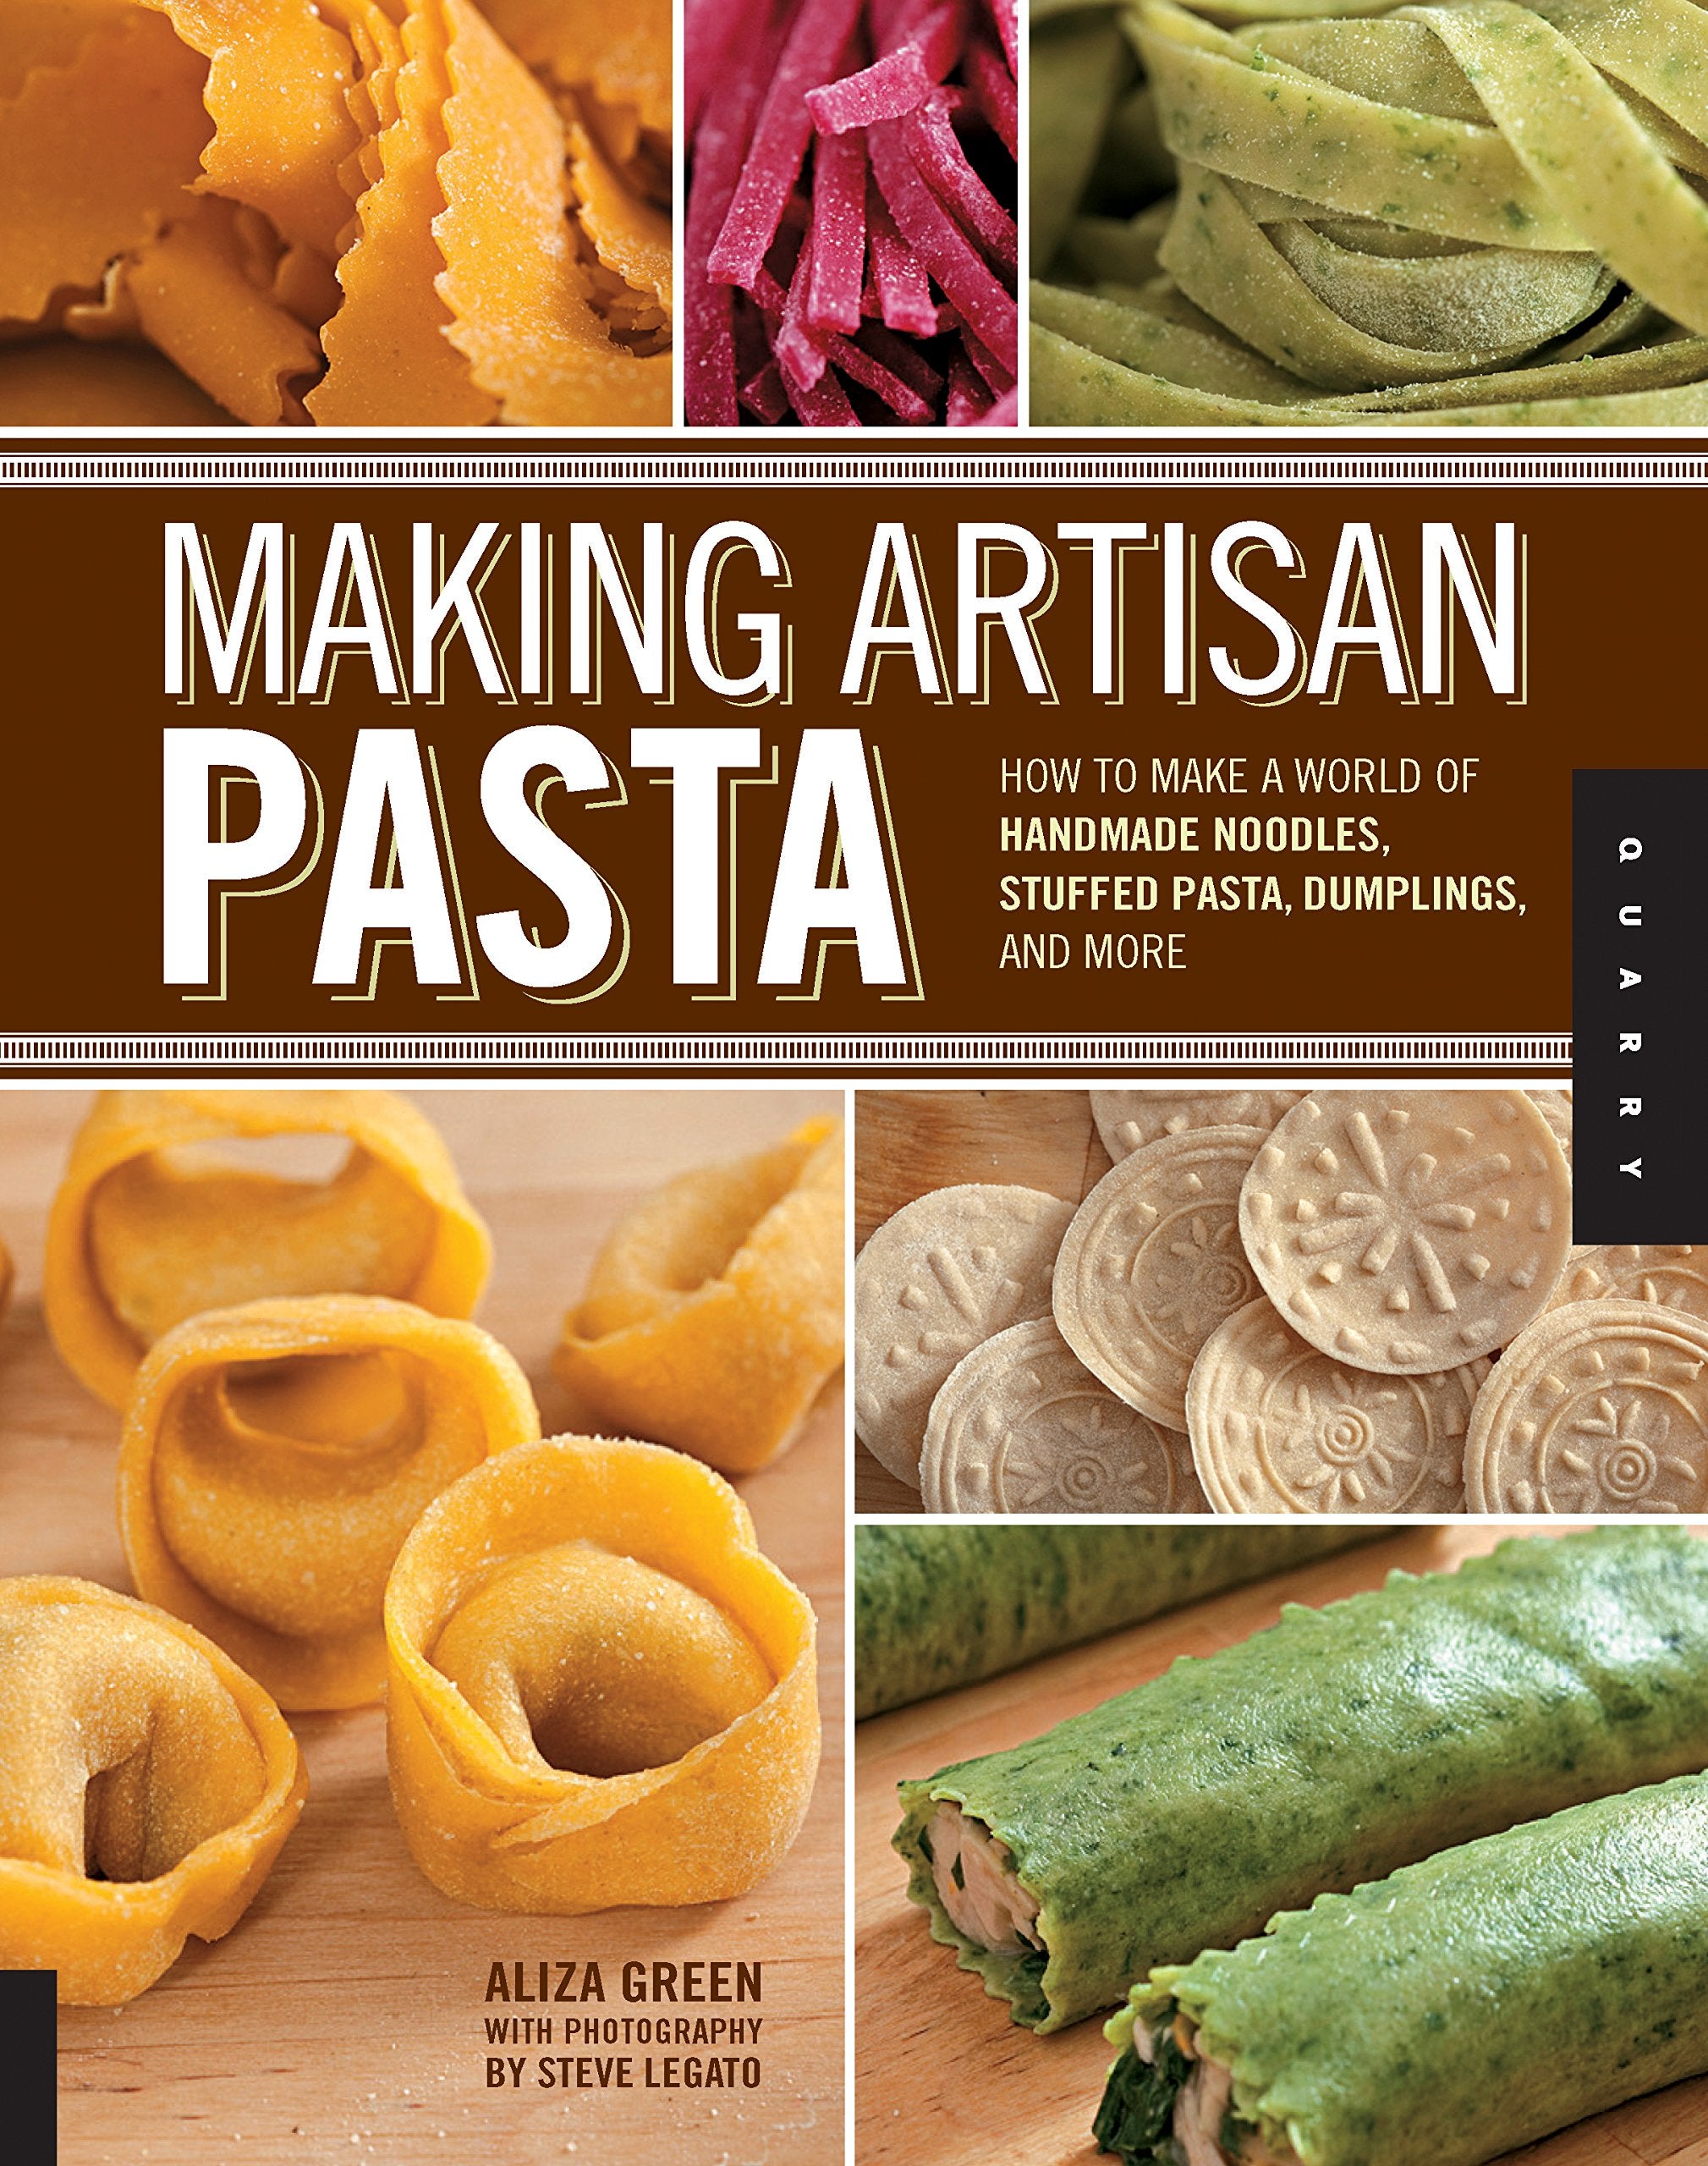 Making Artisan Pasta: How to Make a World of Handmade Noodles, Stuffed Pasta, Dumplings, and More (Aliza Green)